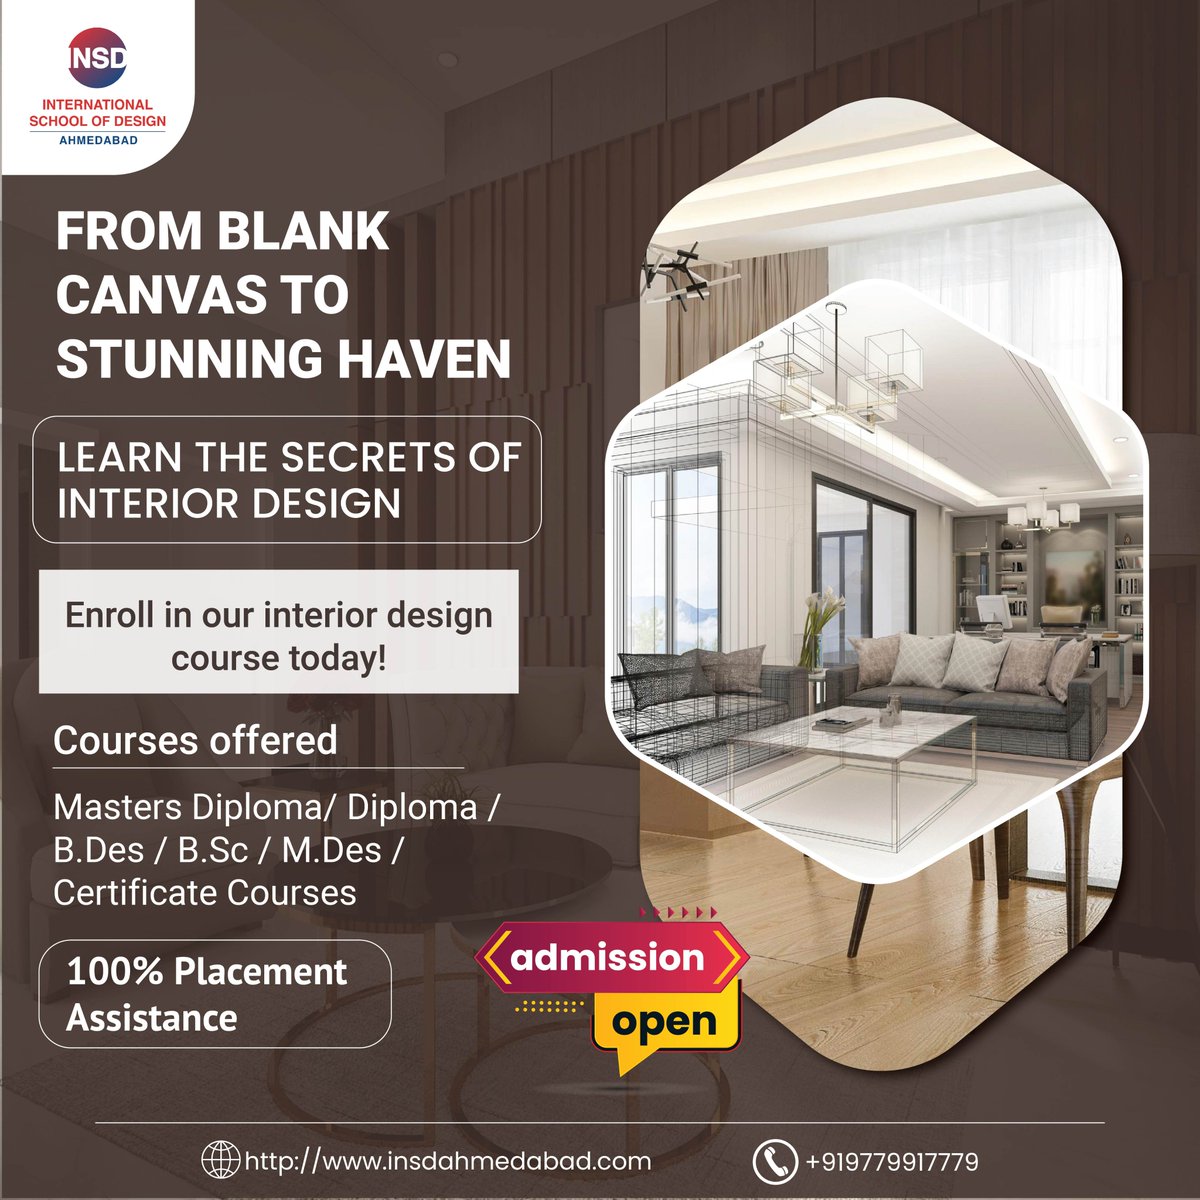 Transform spaces into extraordinary havens with our Interior Design Course! 🏡✨ From concept to visualization, master technical drafting and 3D design with industry experts. #InteriorDesign #DesignCourse #HomeMakeover #DreamCareer #interiordesign #interiordesigner